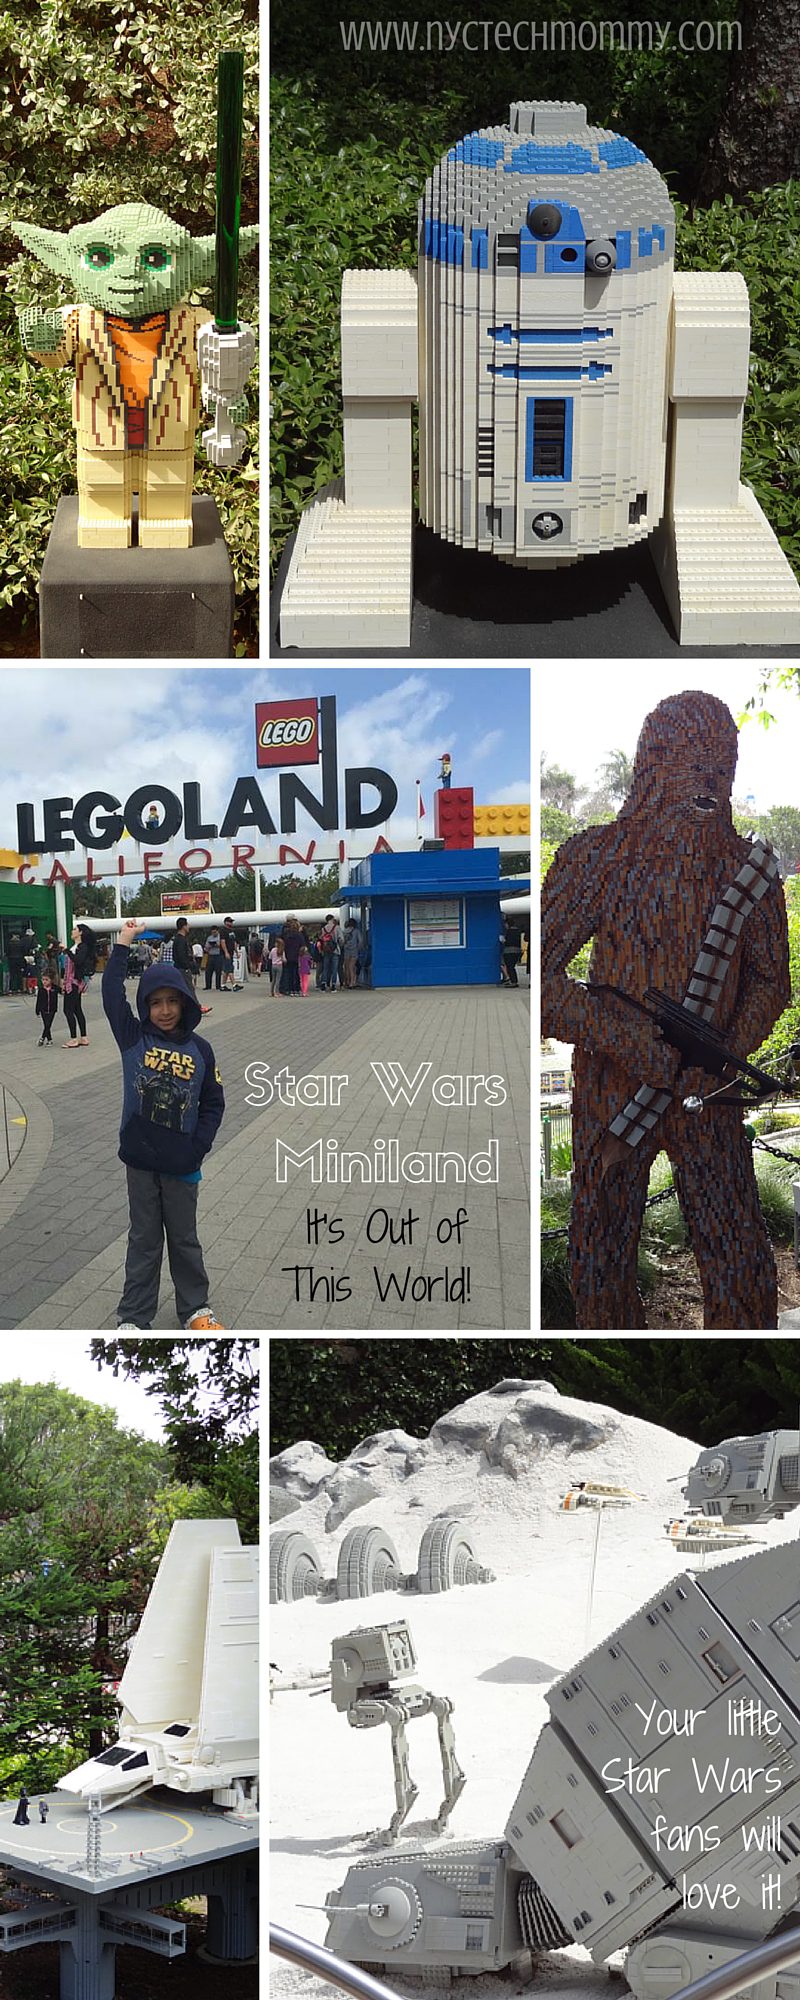 Don't miss an out of this world experience at Star Wars Miniland at Legoland California - Iconic Star Wars movie scenes and favorite characters made out of 1.5 million LEGO bricks built in 1:20 scale - Check out pics and details from our recent trip!